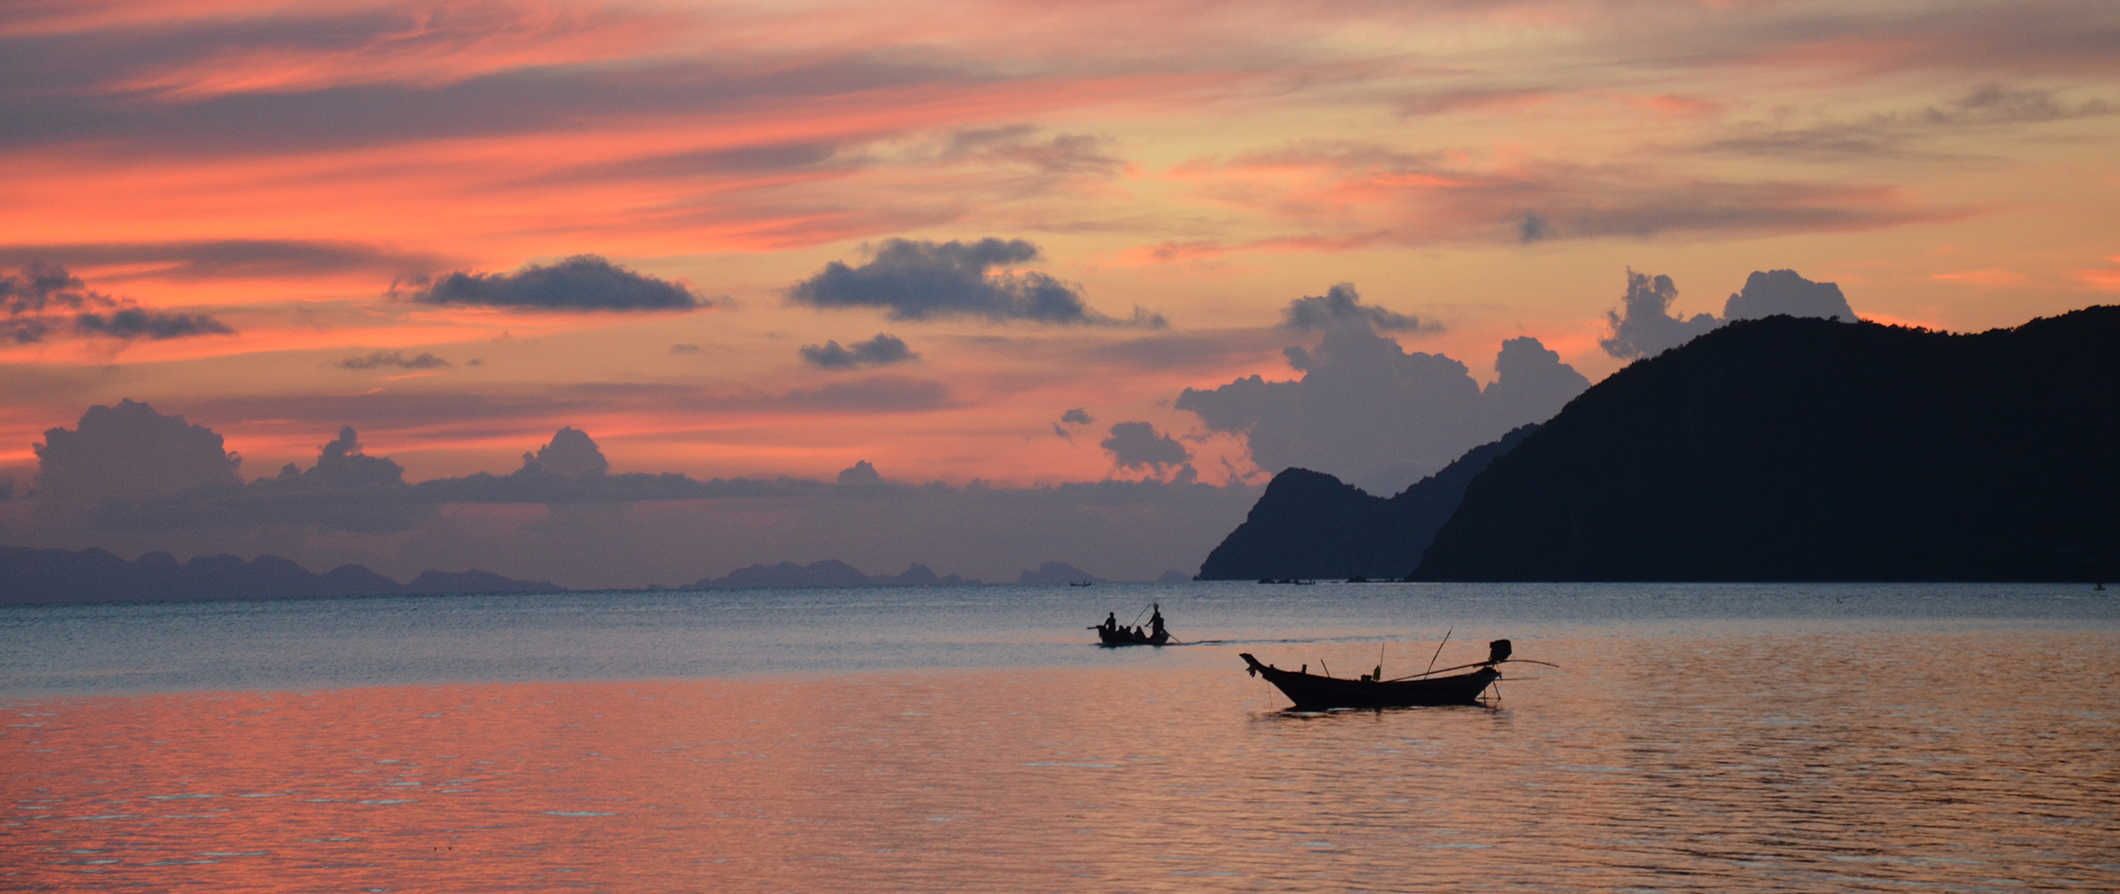 The stunning island of Ko Pha Ngan, Thailand at sunset over the ocean